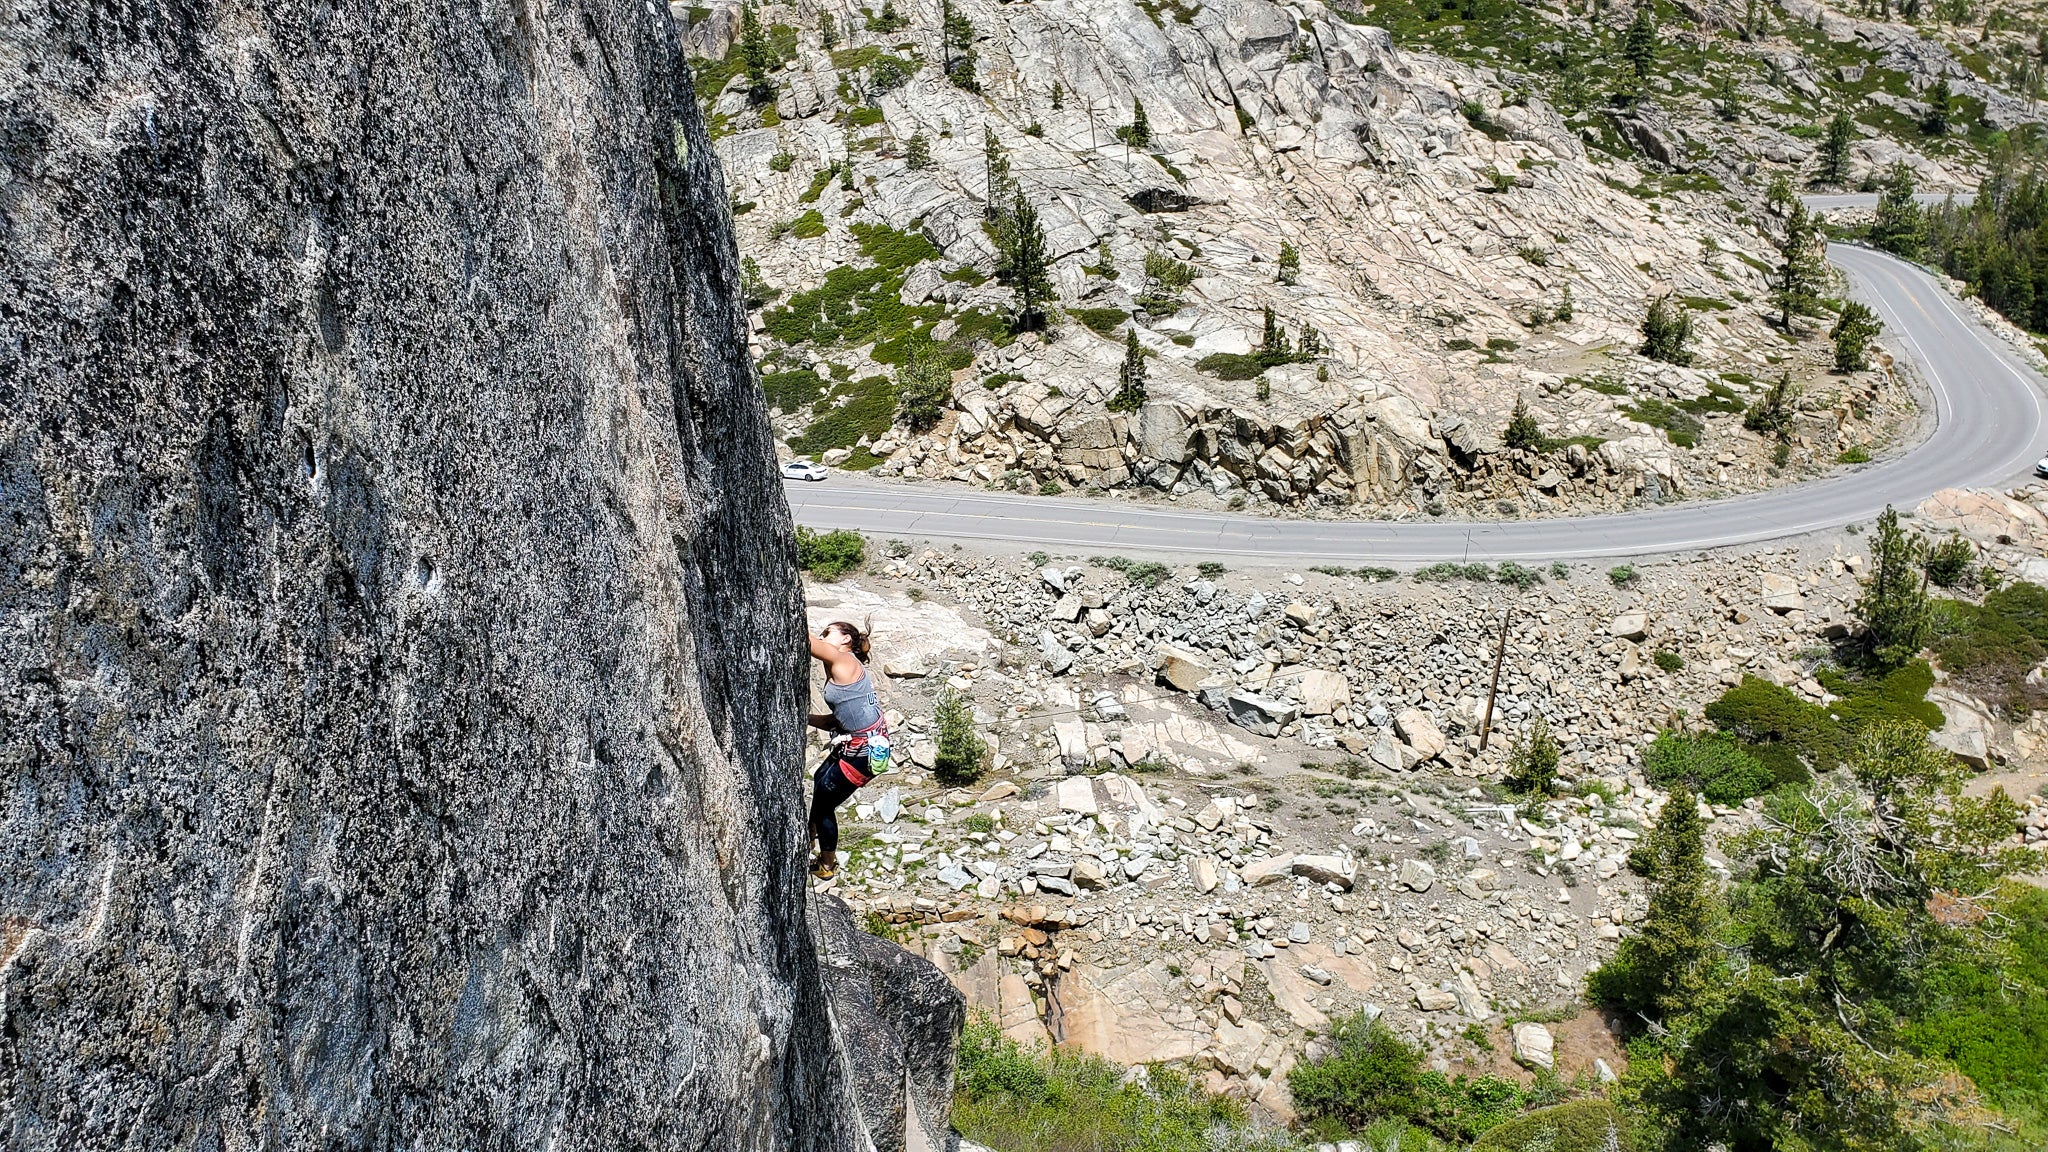 Climbing granite with a rock climbing guide on Donner Summit in Truckee, CA